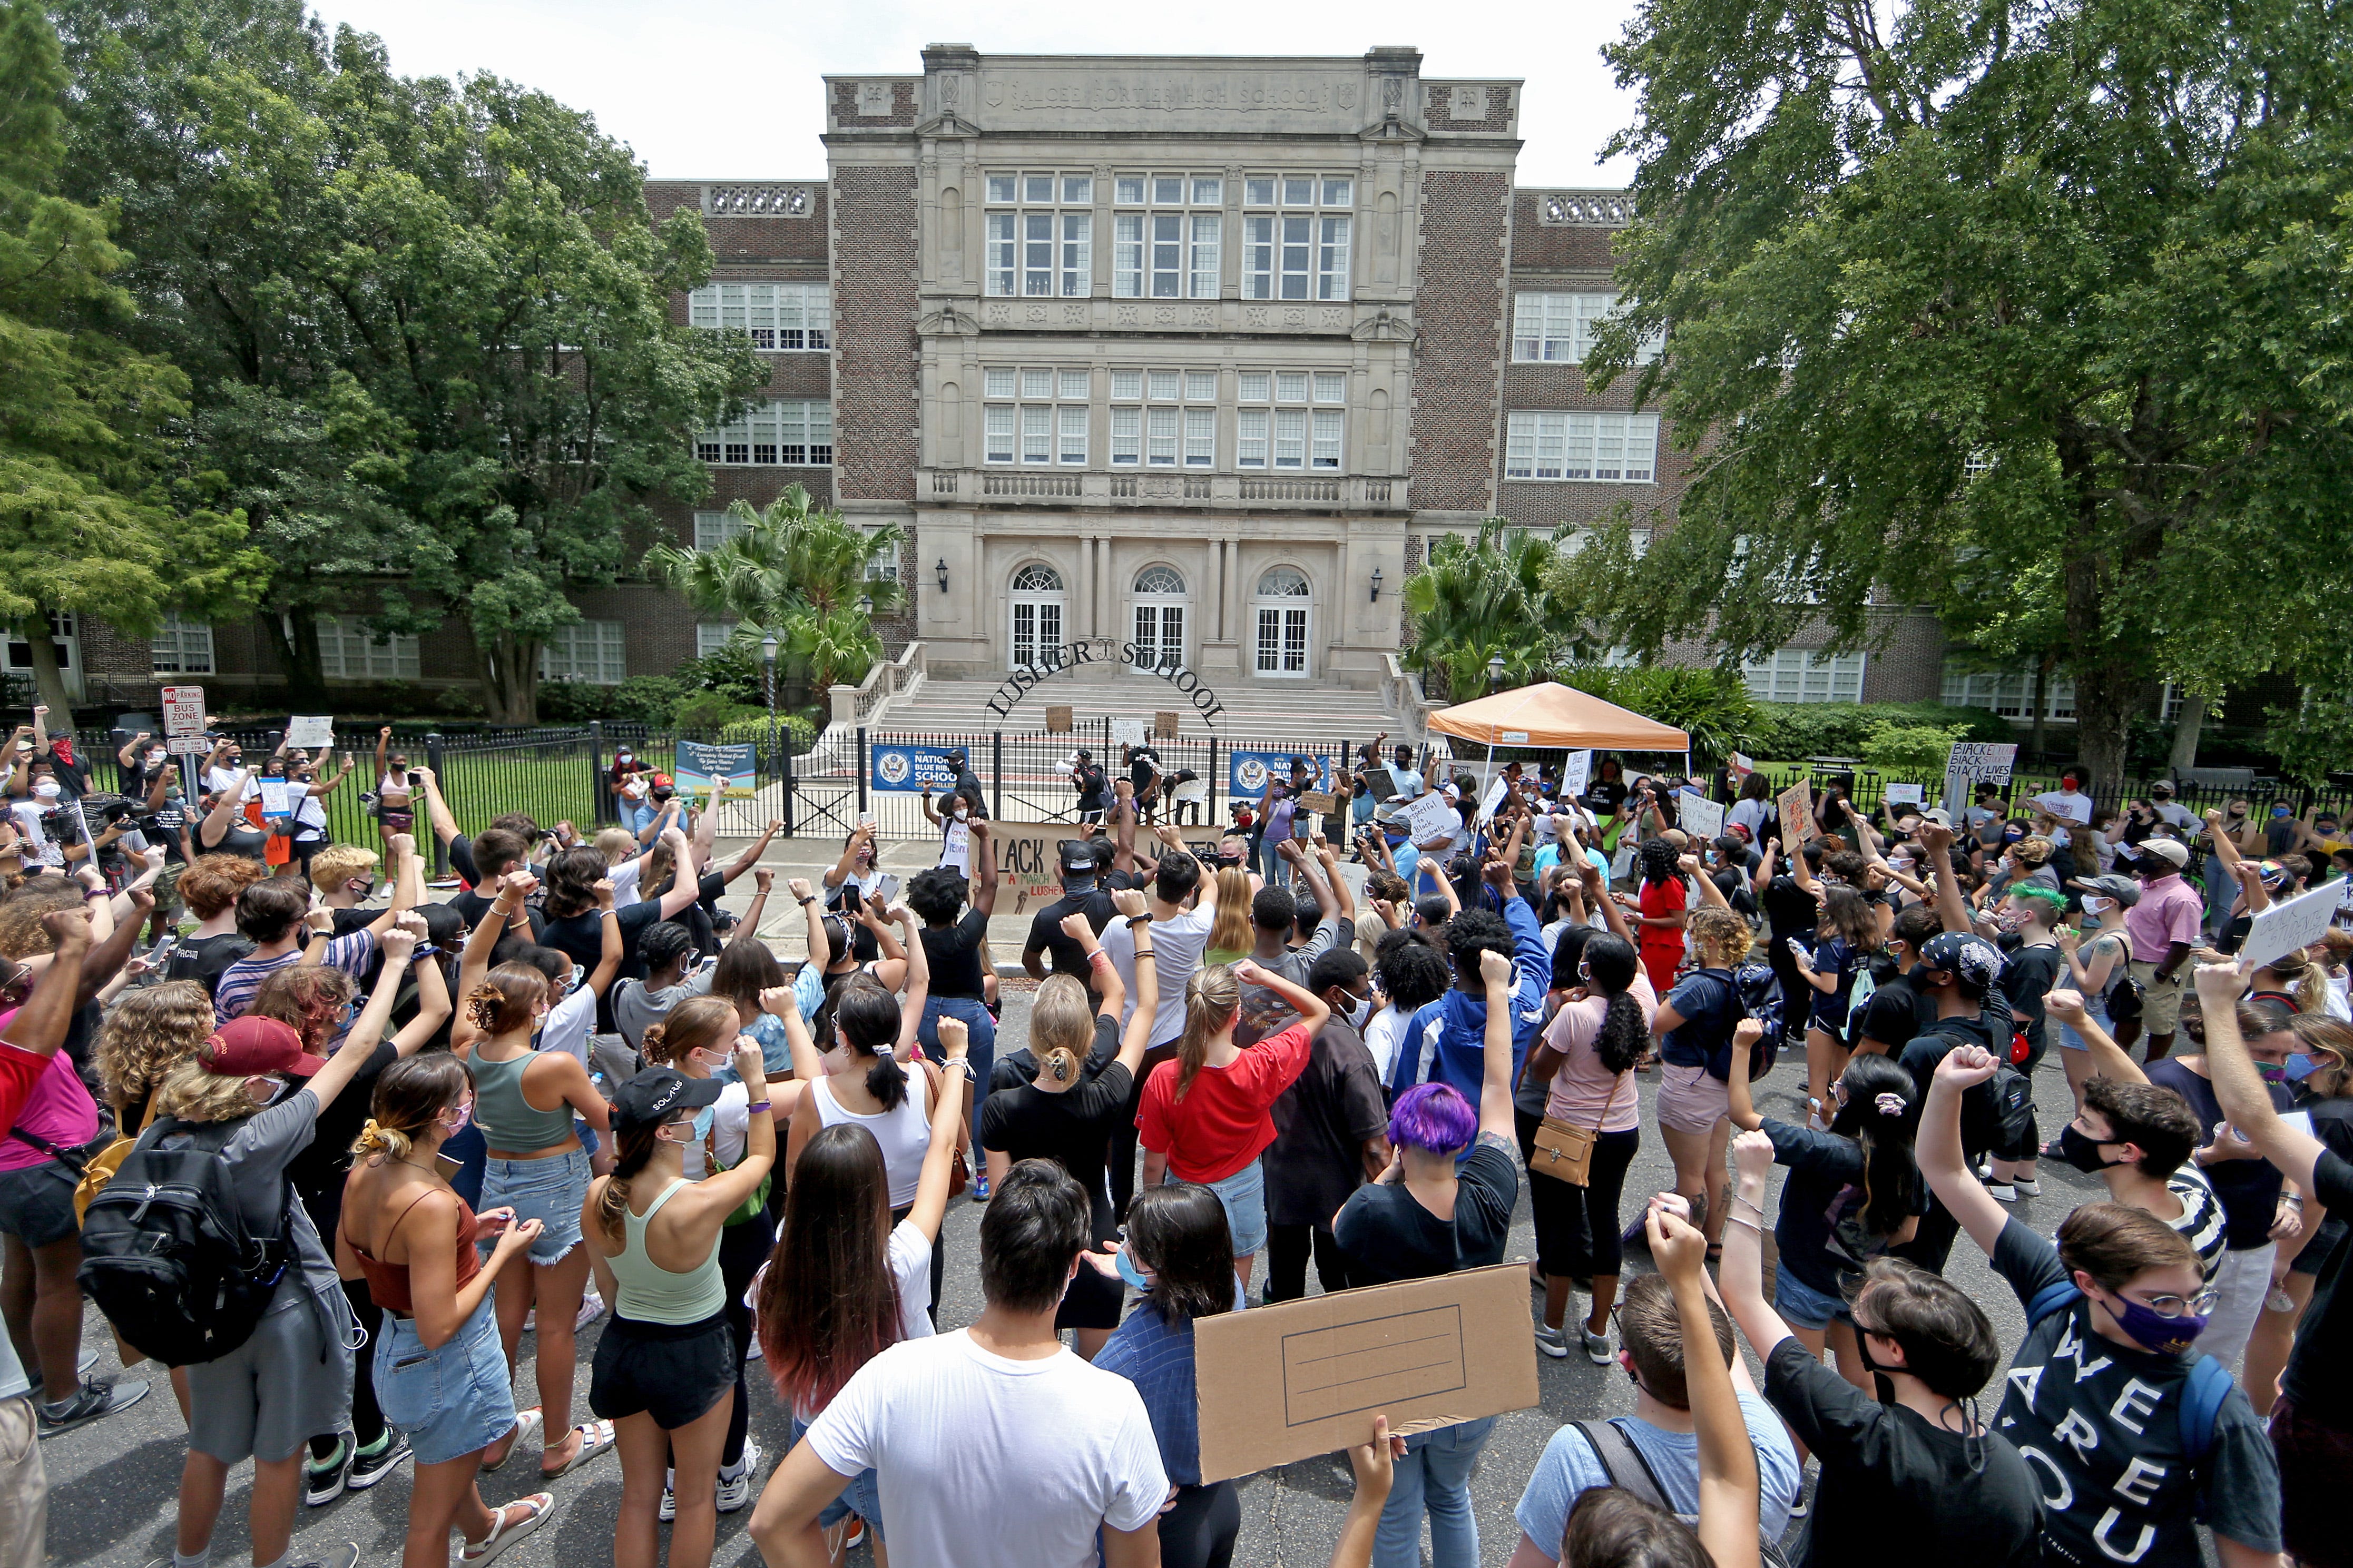 People rally in front of the high school to protest the name of the two educational institutions that comprise Lusher Charter School on July 4 in New Orleans. Protesters, including many current and former students, demanded the Orleans Parish School Board change the name of the charter schools, which honors staunch segregationist Robert Mills Lusher, who advocated using public education to advance white supremacy while serving as the Louisiana superintendent of education after the Civil War, during which he worked as a tax collector for the Confederacy.